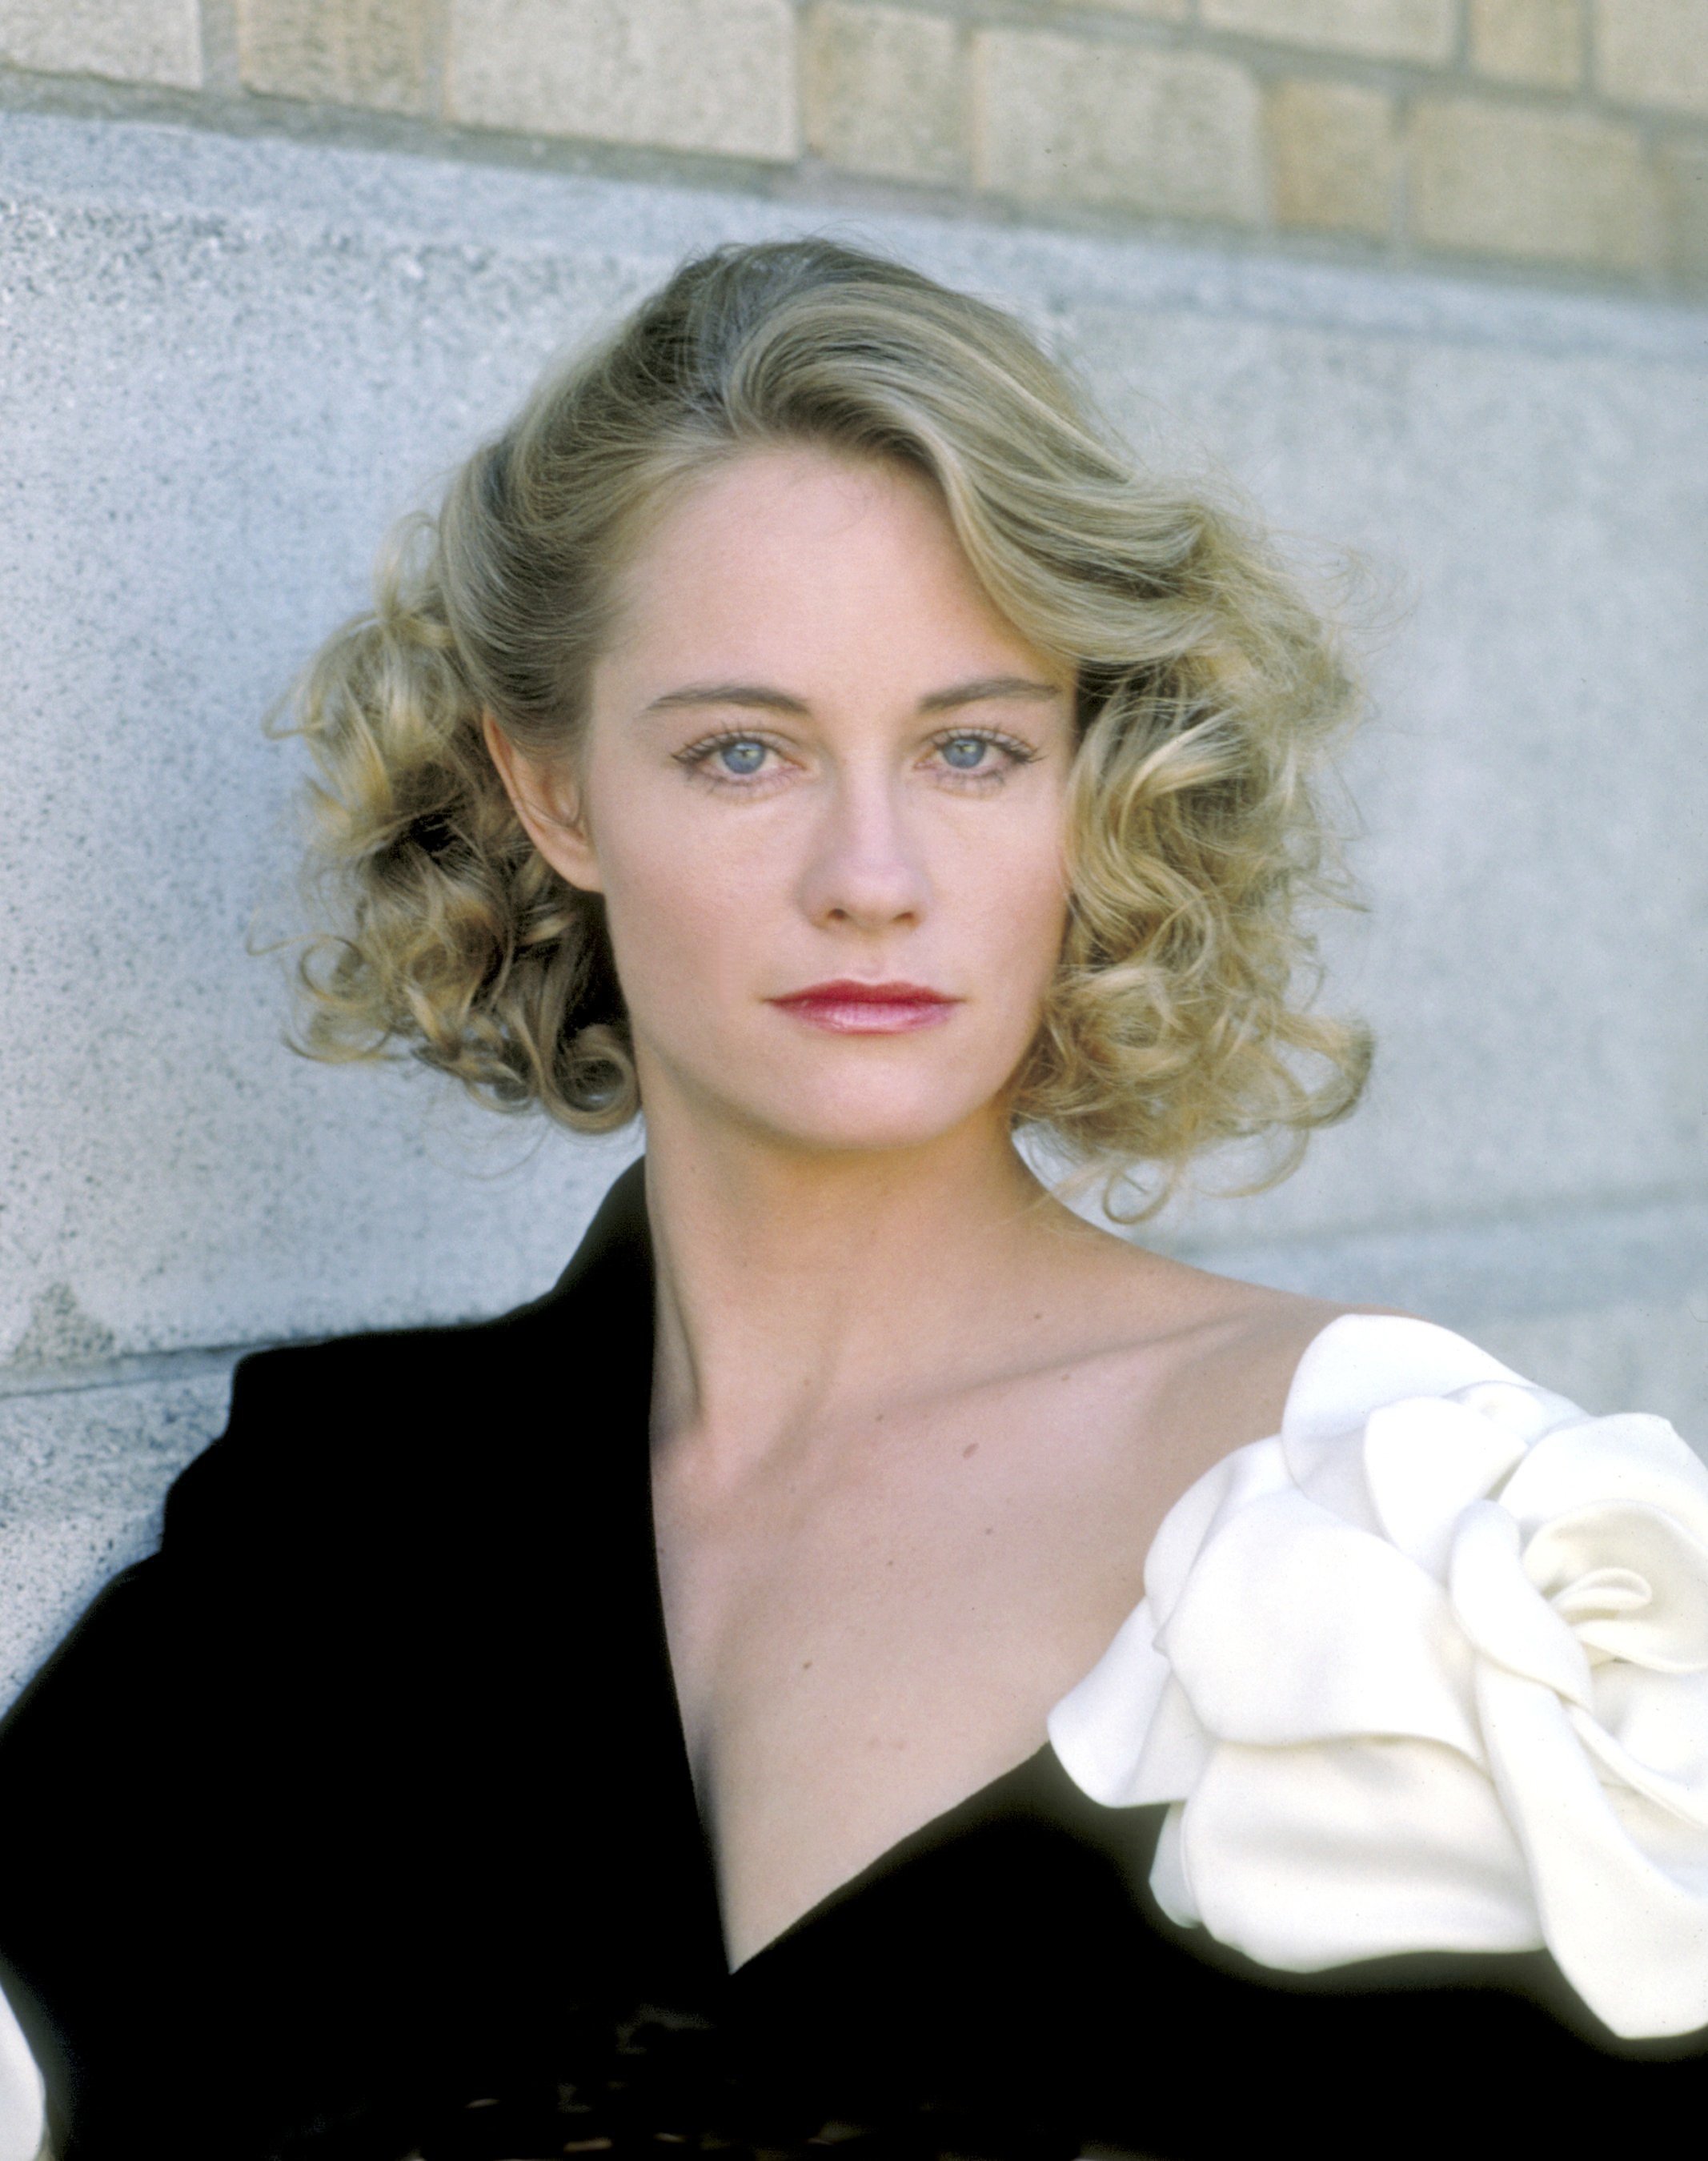 Cybill Shepherd starring as a former fashion model in Season 1 of "Moonlighting," on March 3, 1985. / Source: Getty Images